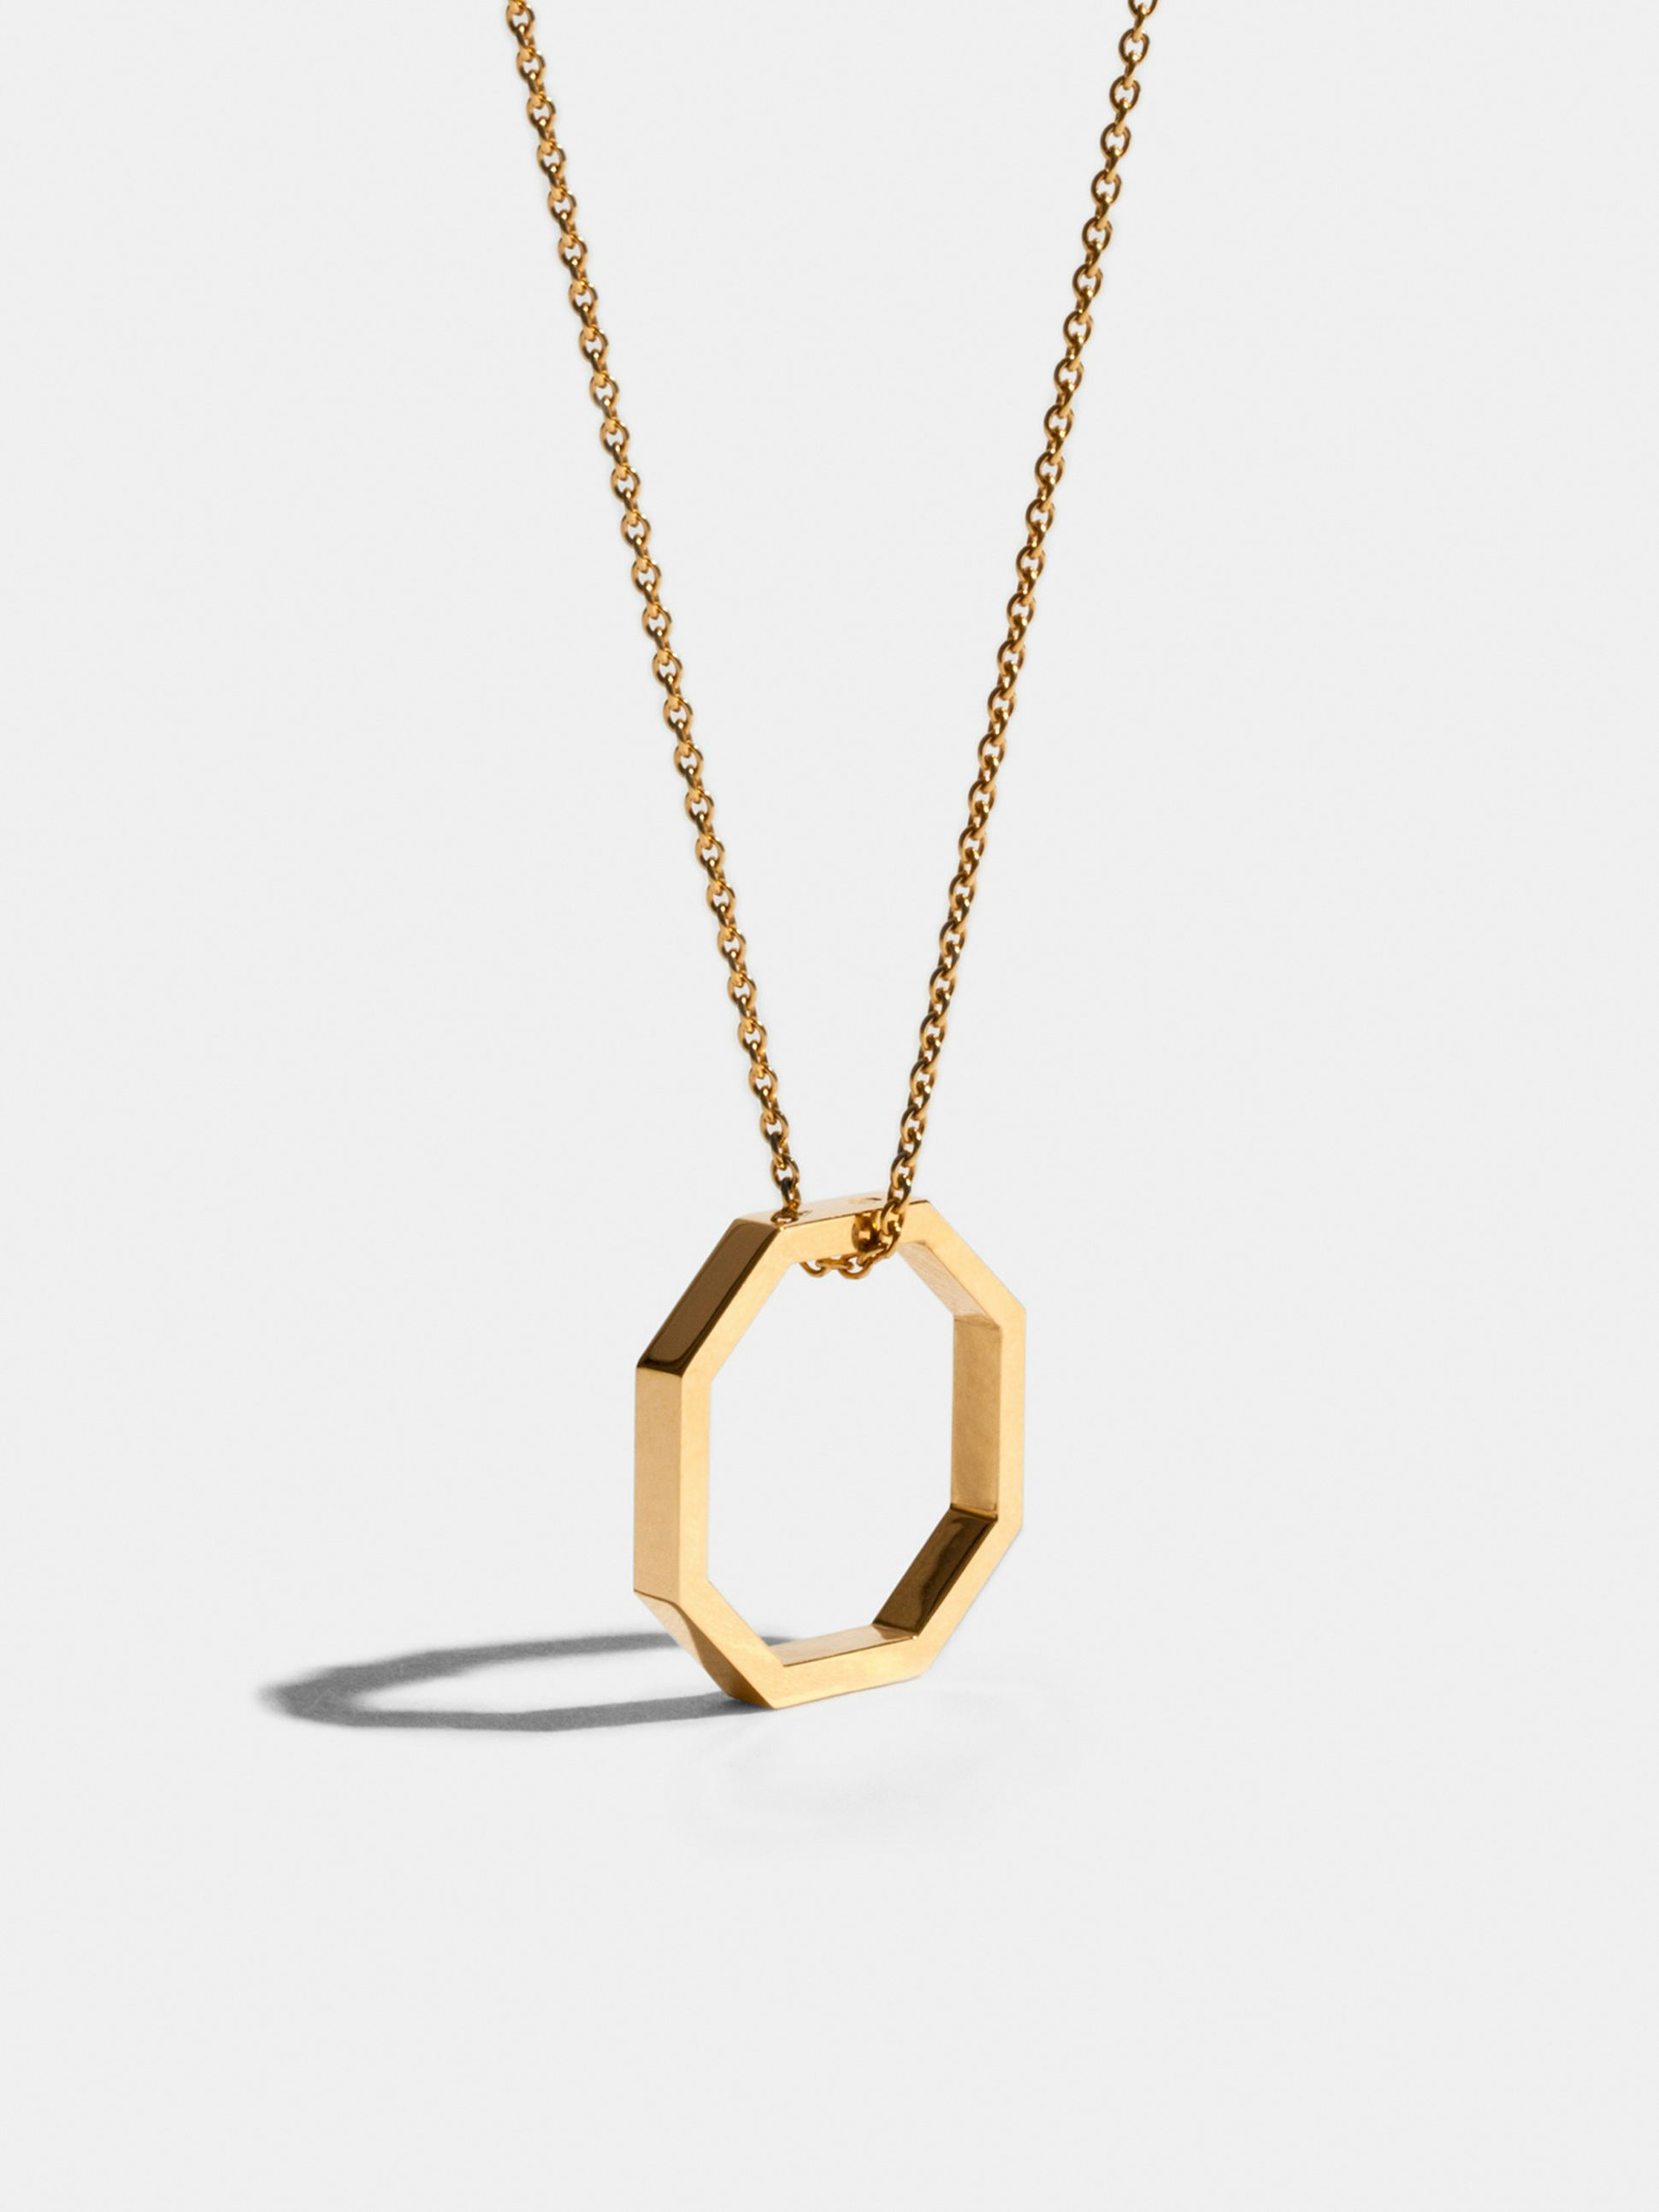 Octogone necklace with a 18mm pendant in 18k Fairmined ethical yellow gold, on a 88cm chain.